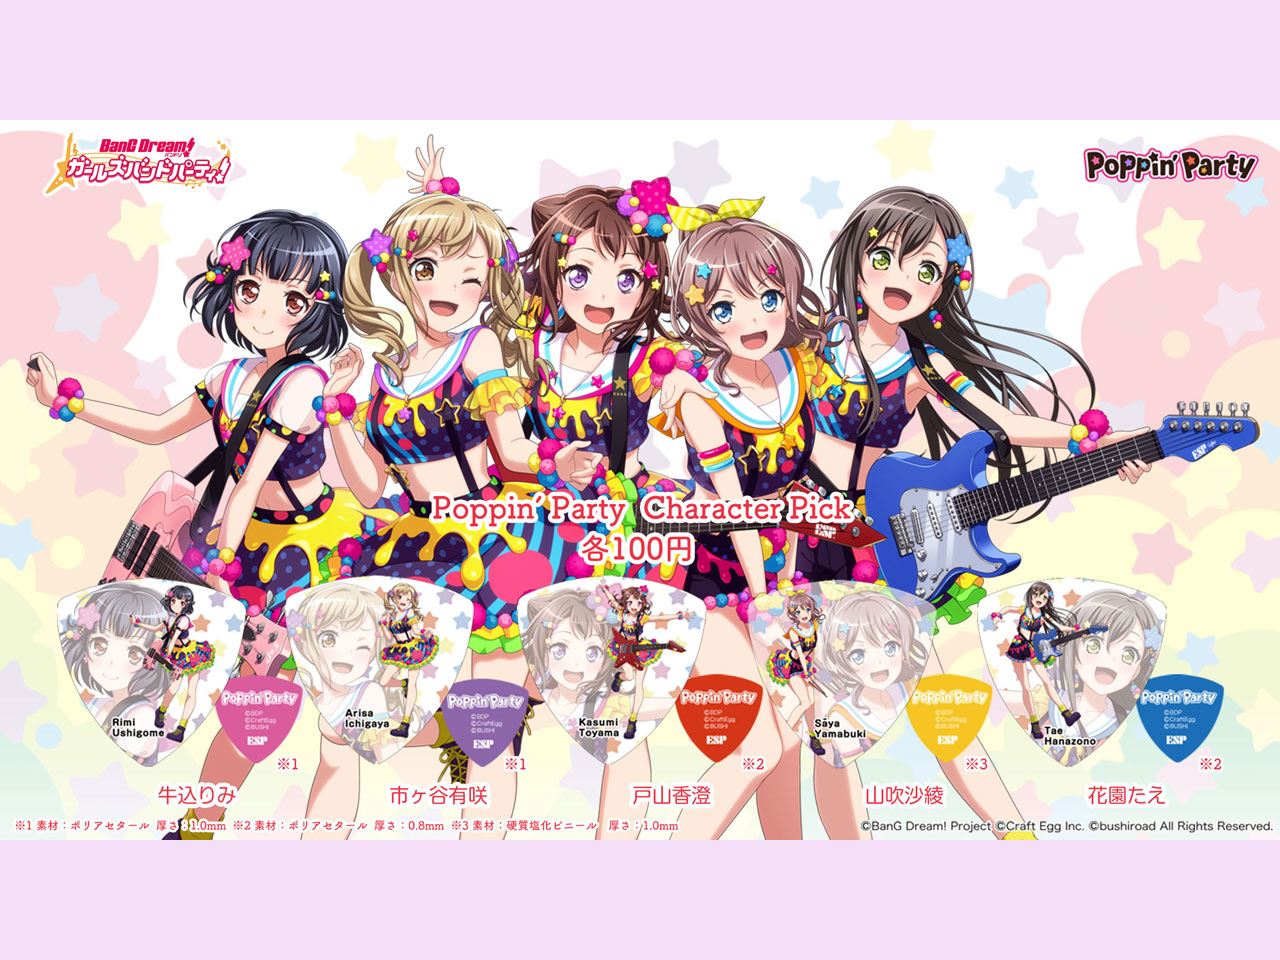 【ESP×BanG Dream!コラボピック】Poppin' Party Character Pick "市ヶ谷有咲"（GBP Arisa 2）& "ハメパチ" セット